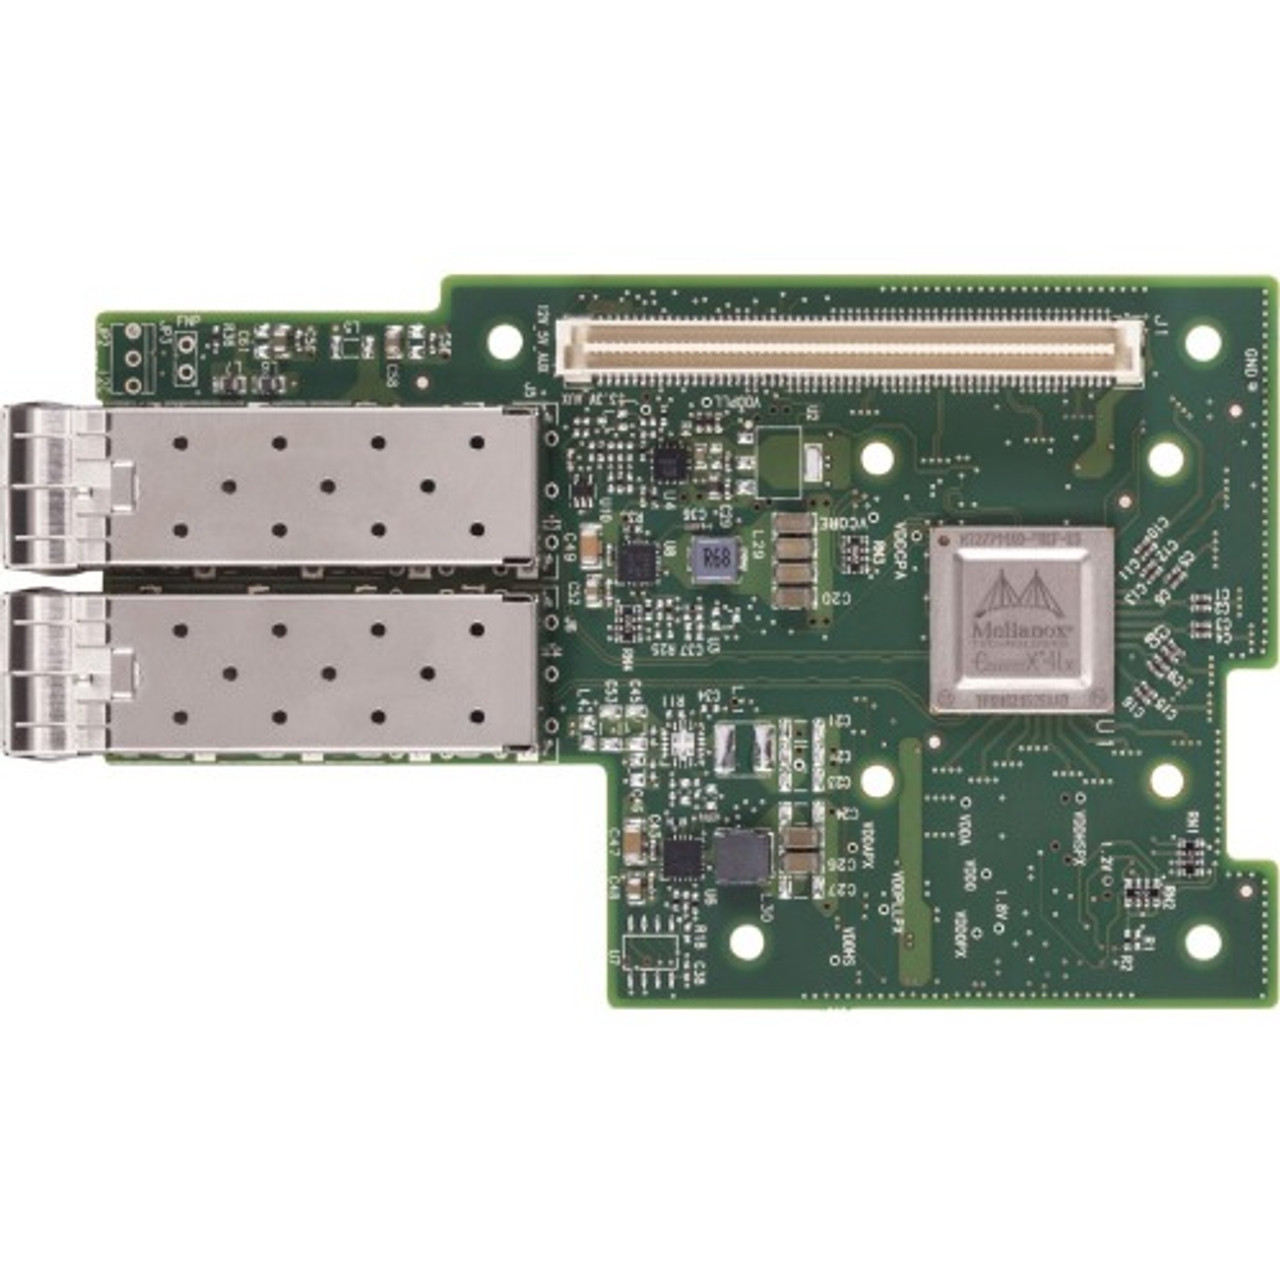 MCX4421A-XCQN Mellanox Connectx-4 Lx En Network Interface Card For Ocp With Host Management, 10gbe Dual-Port Sfp28, Pcie3.0 X8, No Bracket, Rohs R6